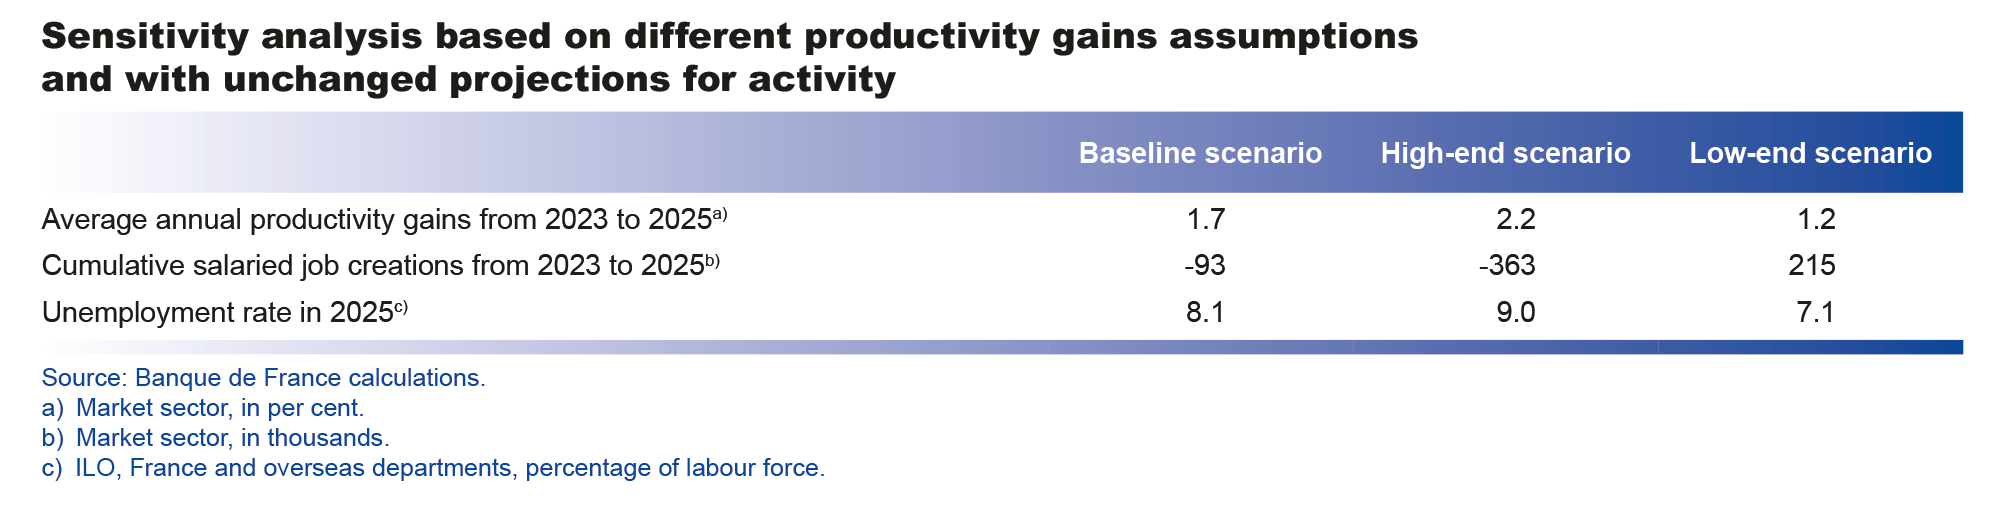 Macroeconomic projections – March 2023 - Sensitivity analysis based on different productivity gains assumptions and with unchanged projections for activity